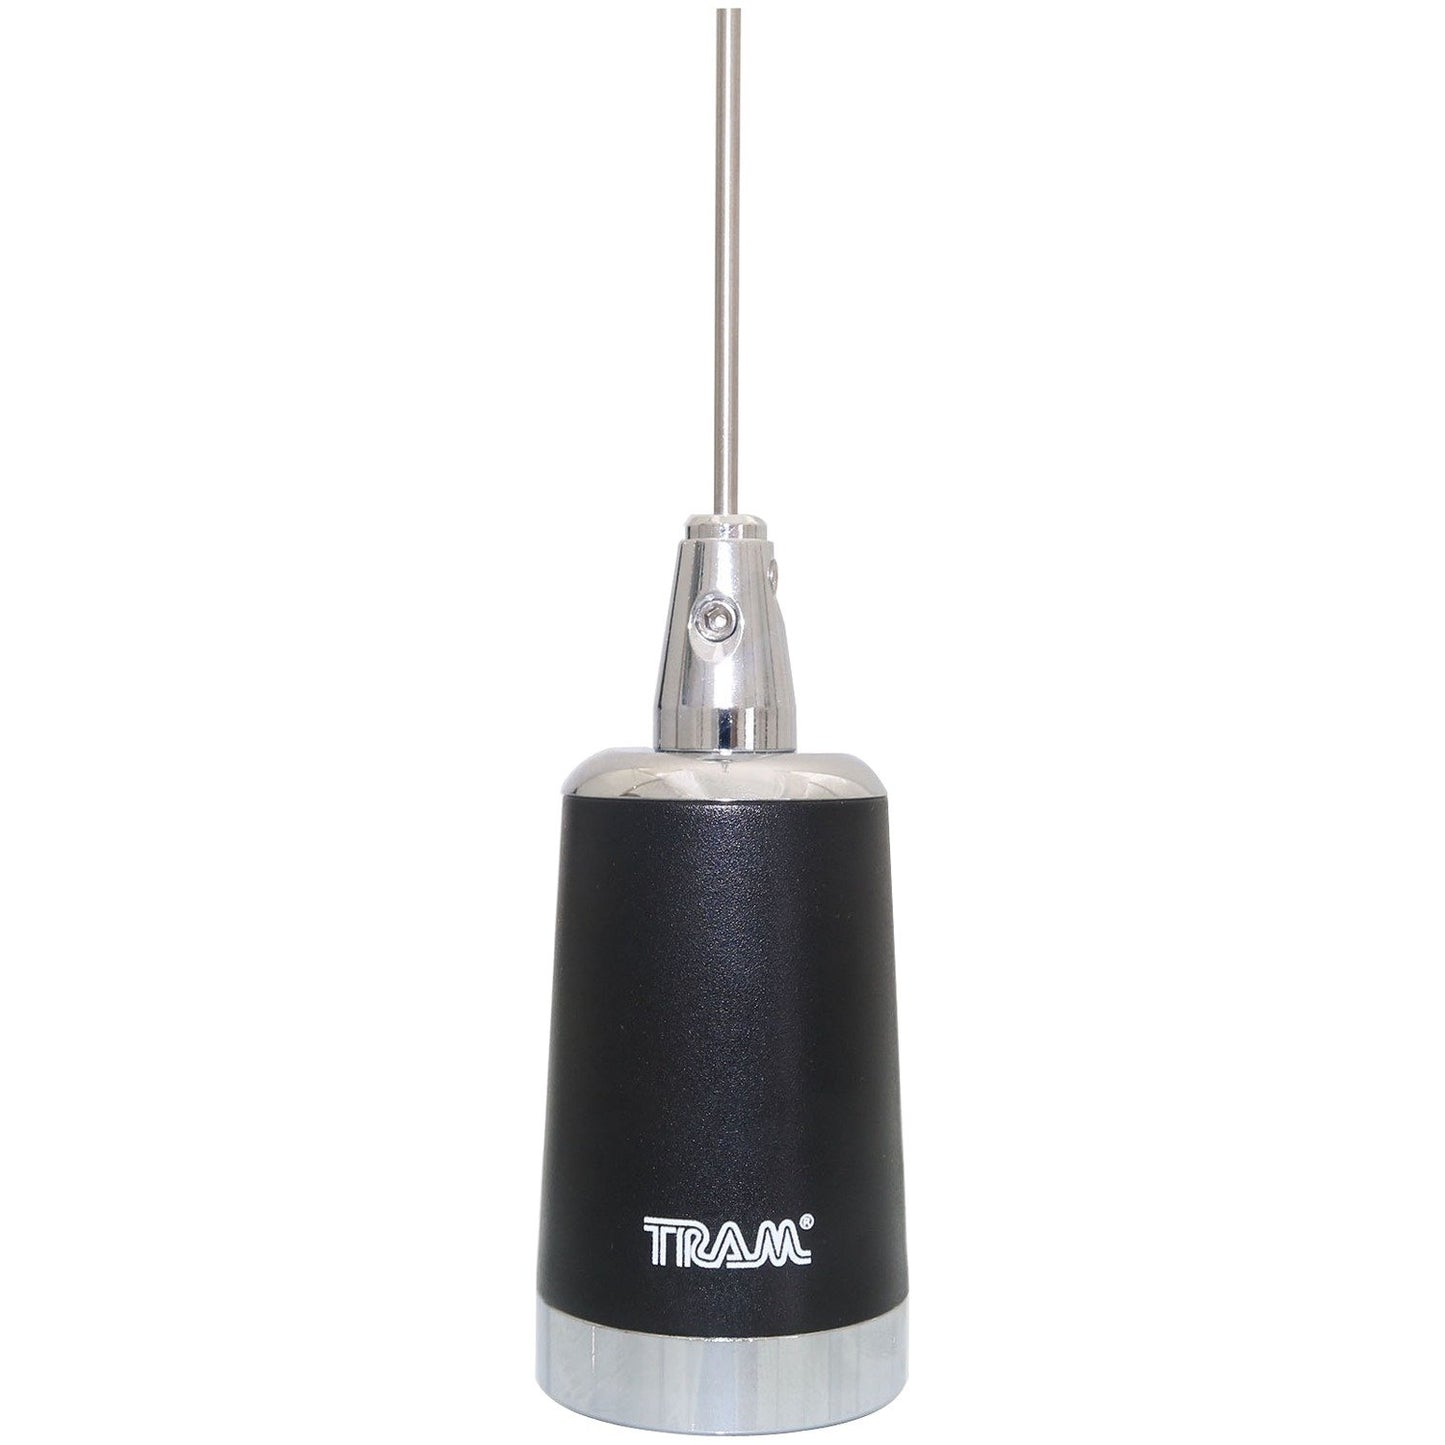 Tram 1180 Pre-Tuned 144MHz-148MHz VHF/430MHz-450MHz UHF Amateur Dual-Band NMO